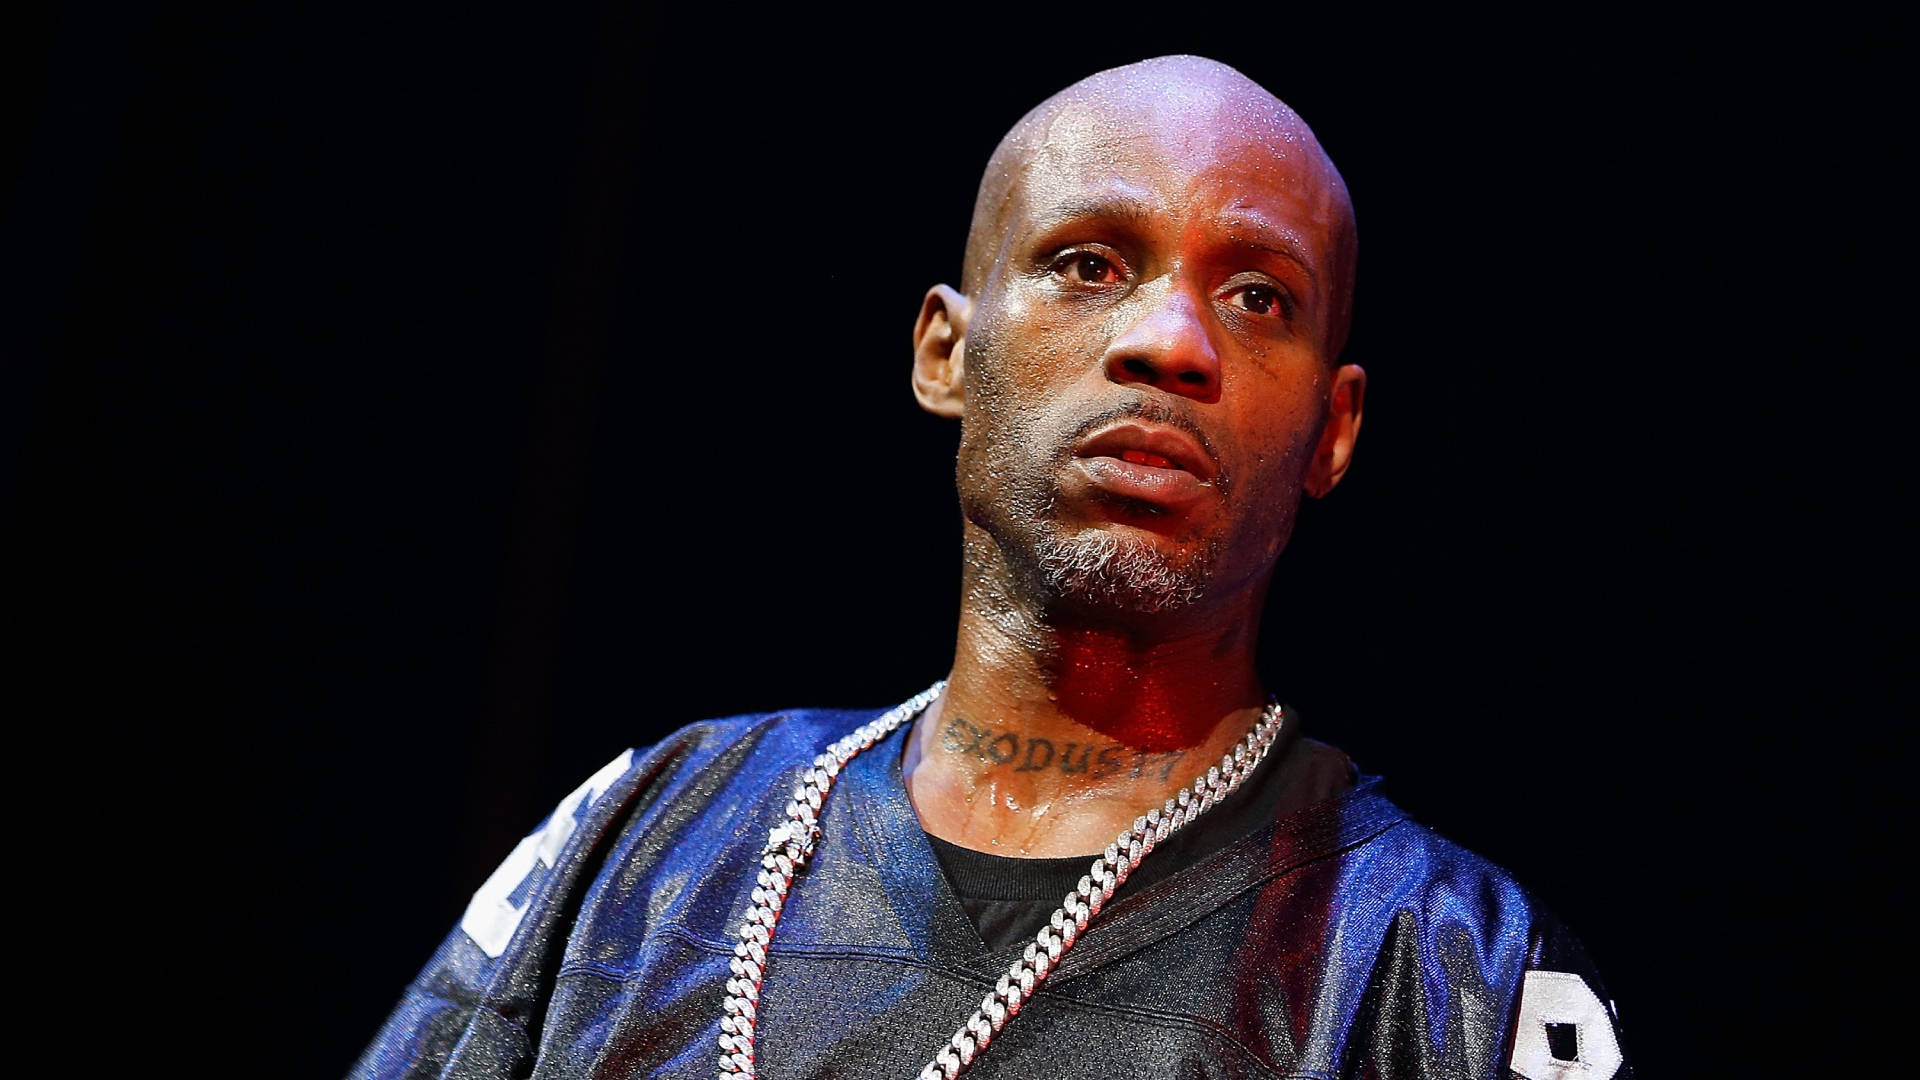 Earl Simmons Dmx Background